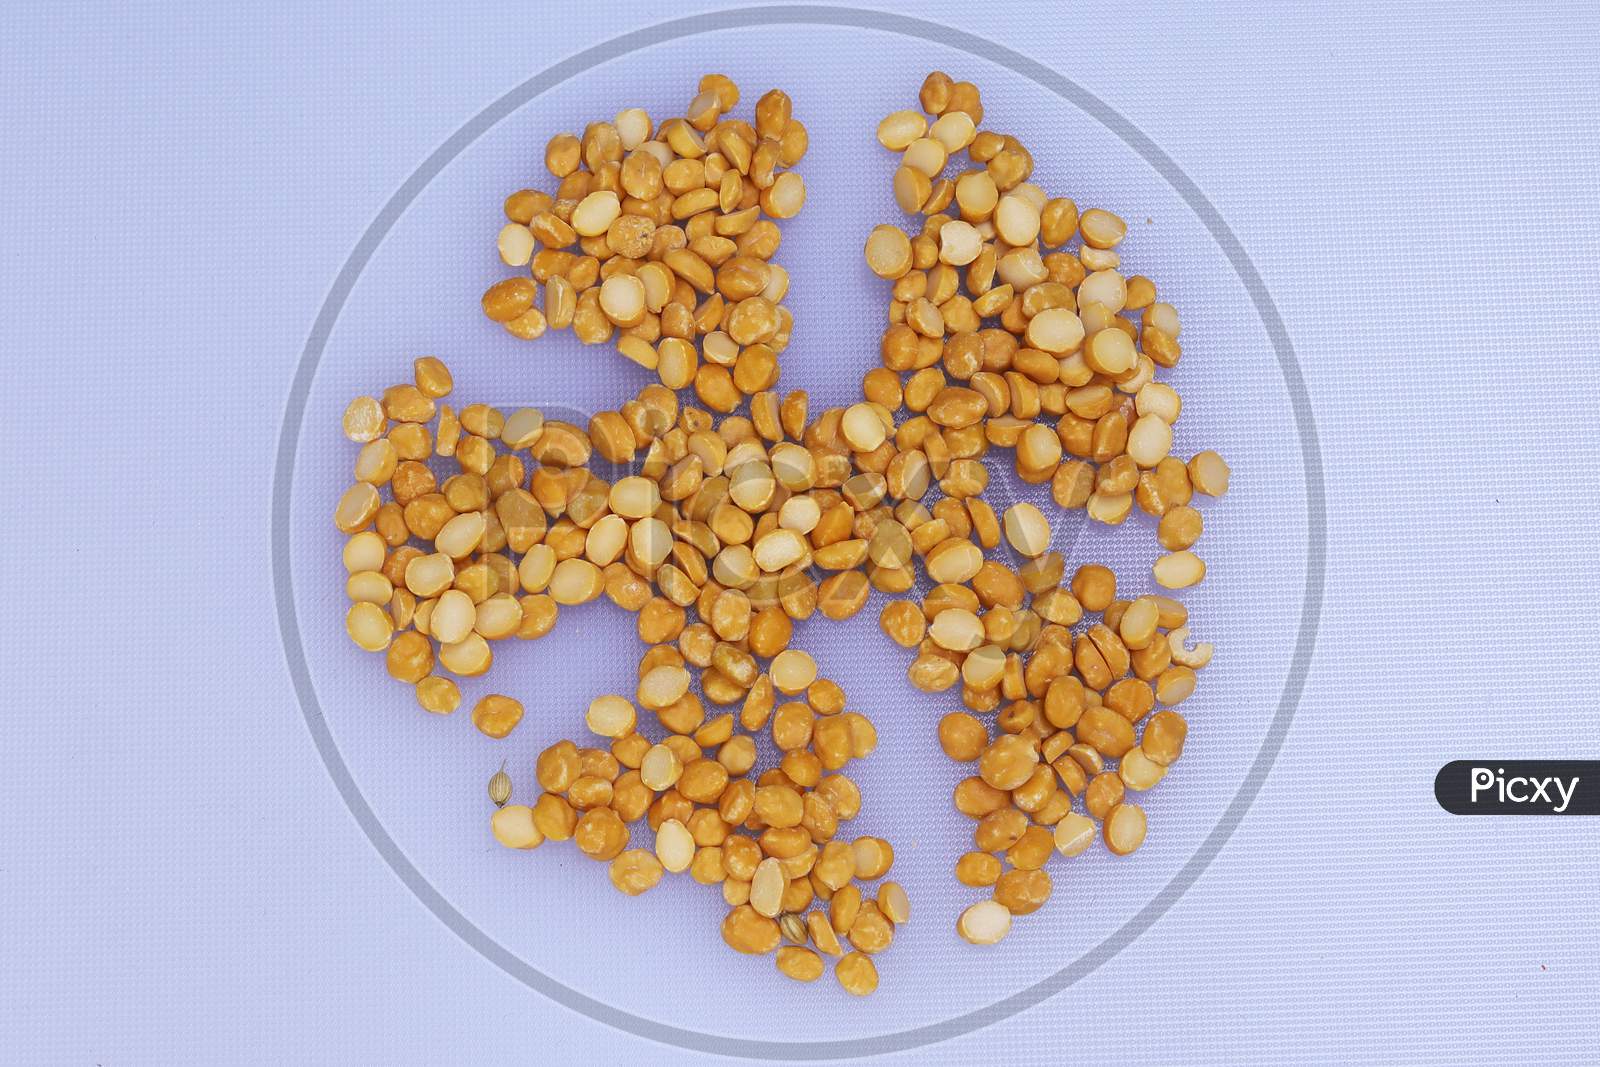 Yellow color split raw Chana dal or chickpeas lentils